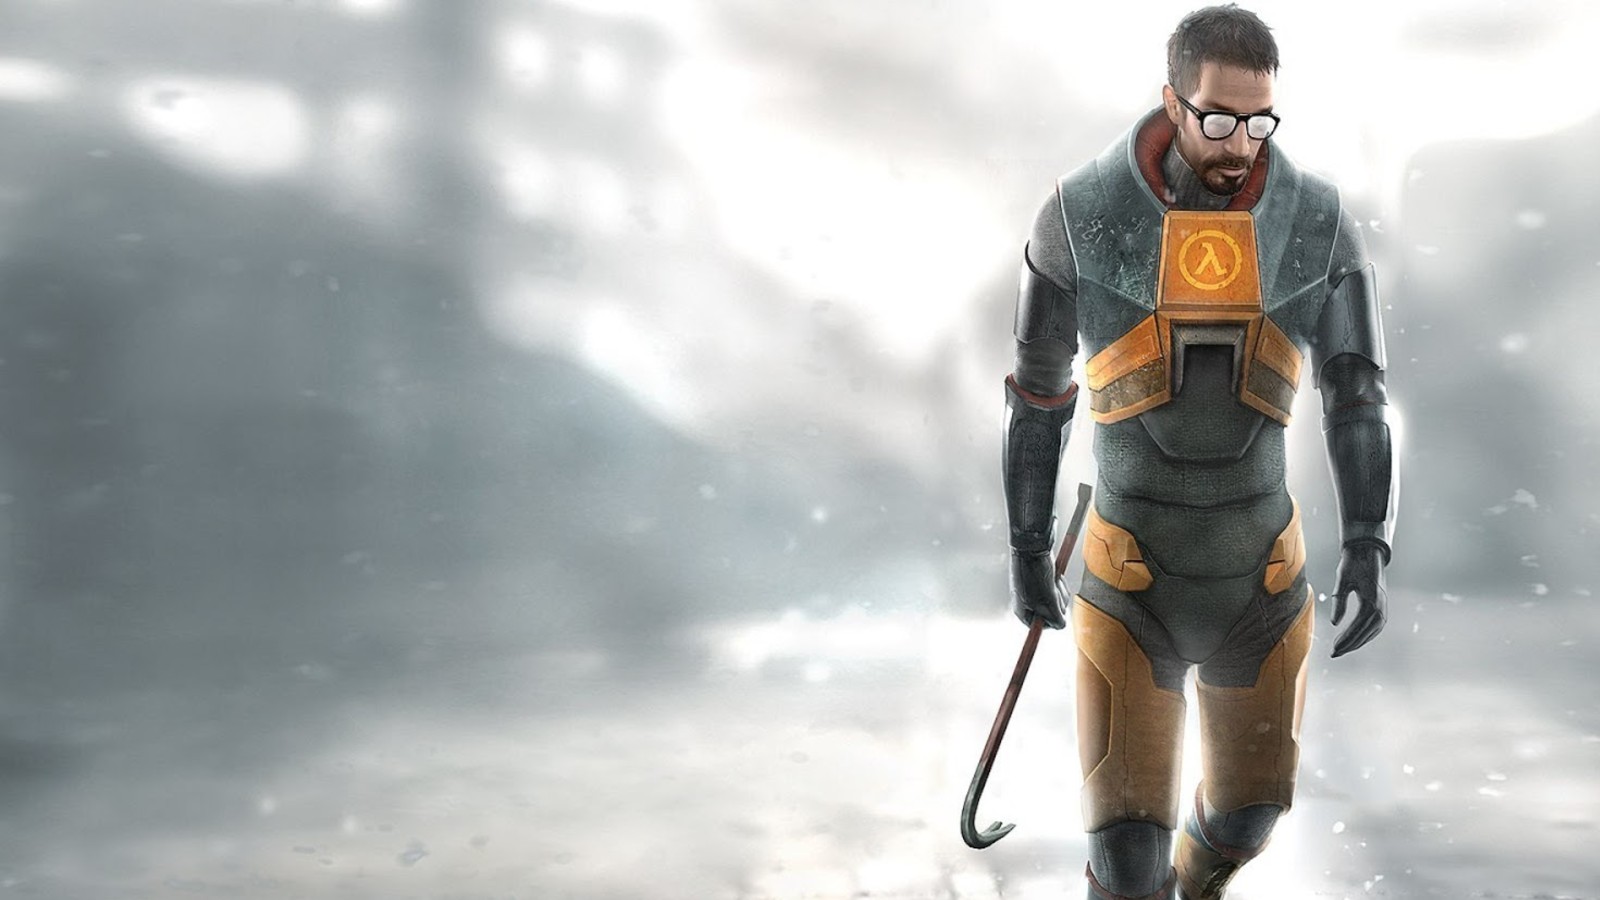 Half-Life: Alyx is anything but Half-Life 3